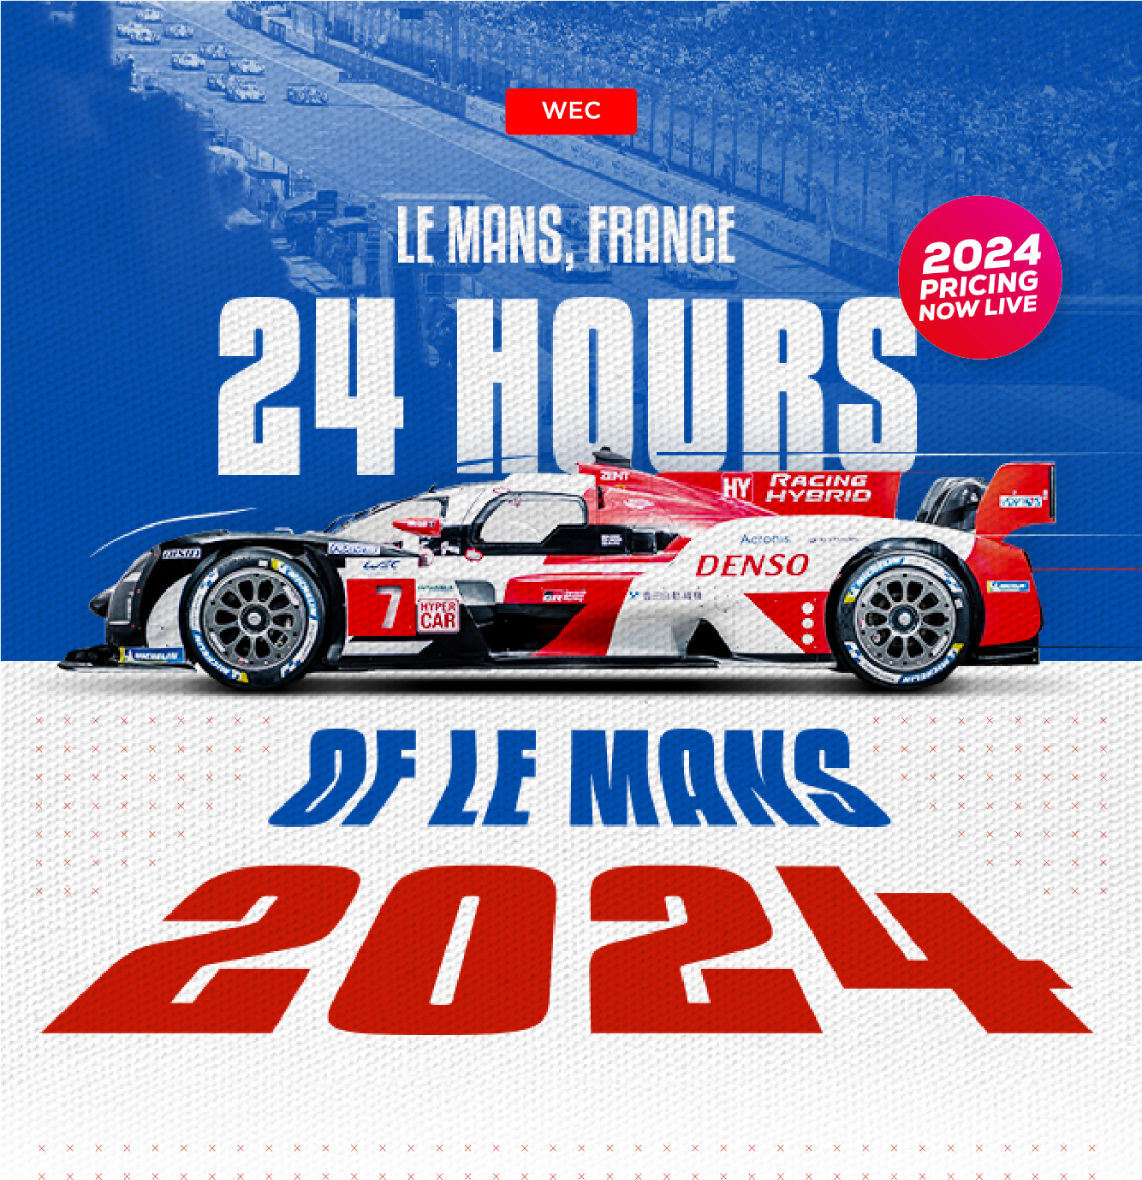 LE MANS 2024 PRICING NOW LIVE GRAPHIC